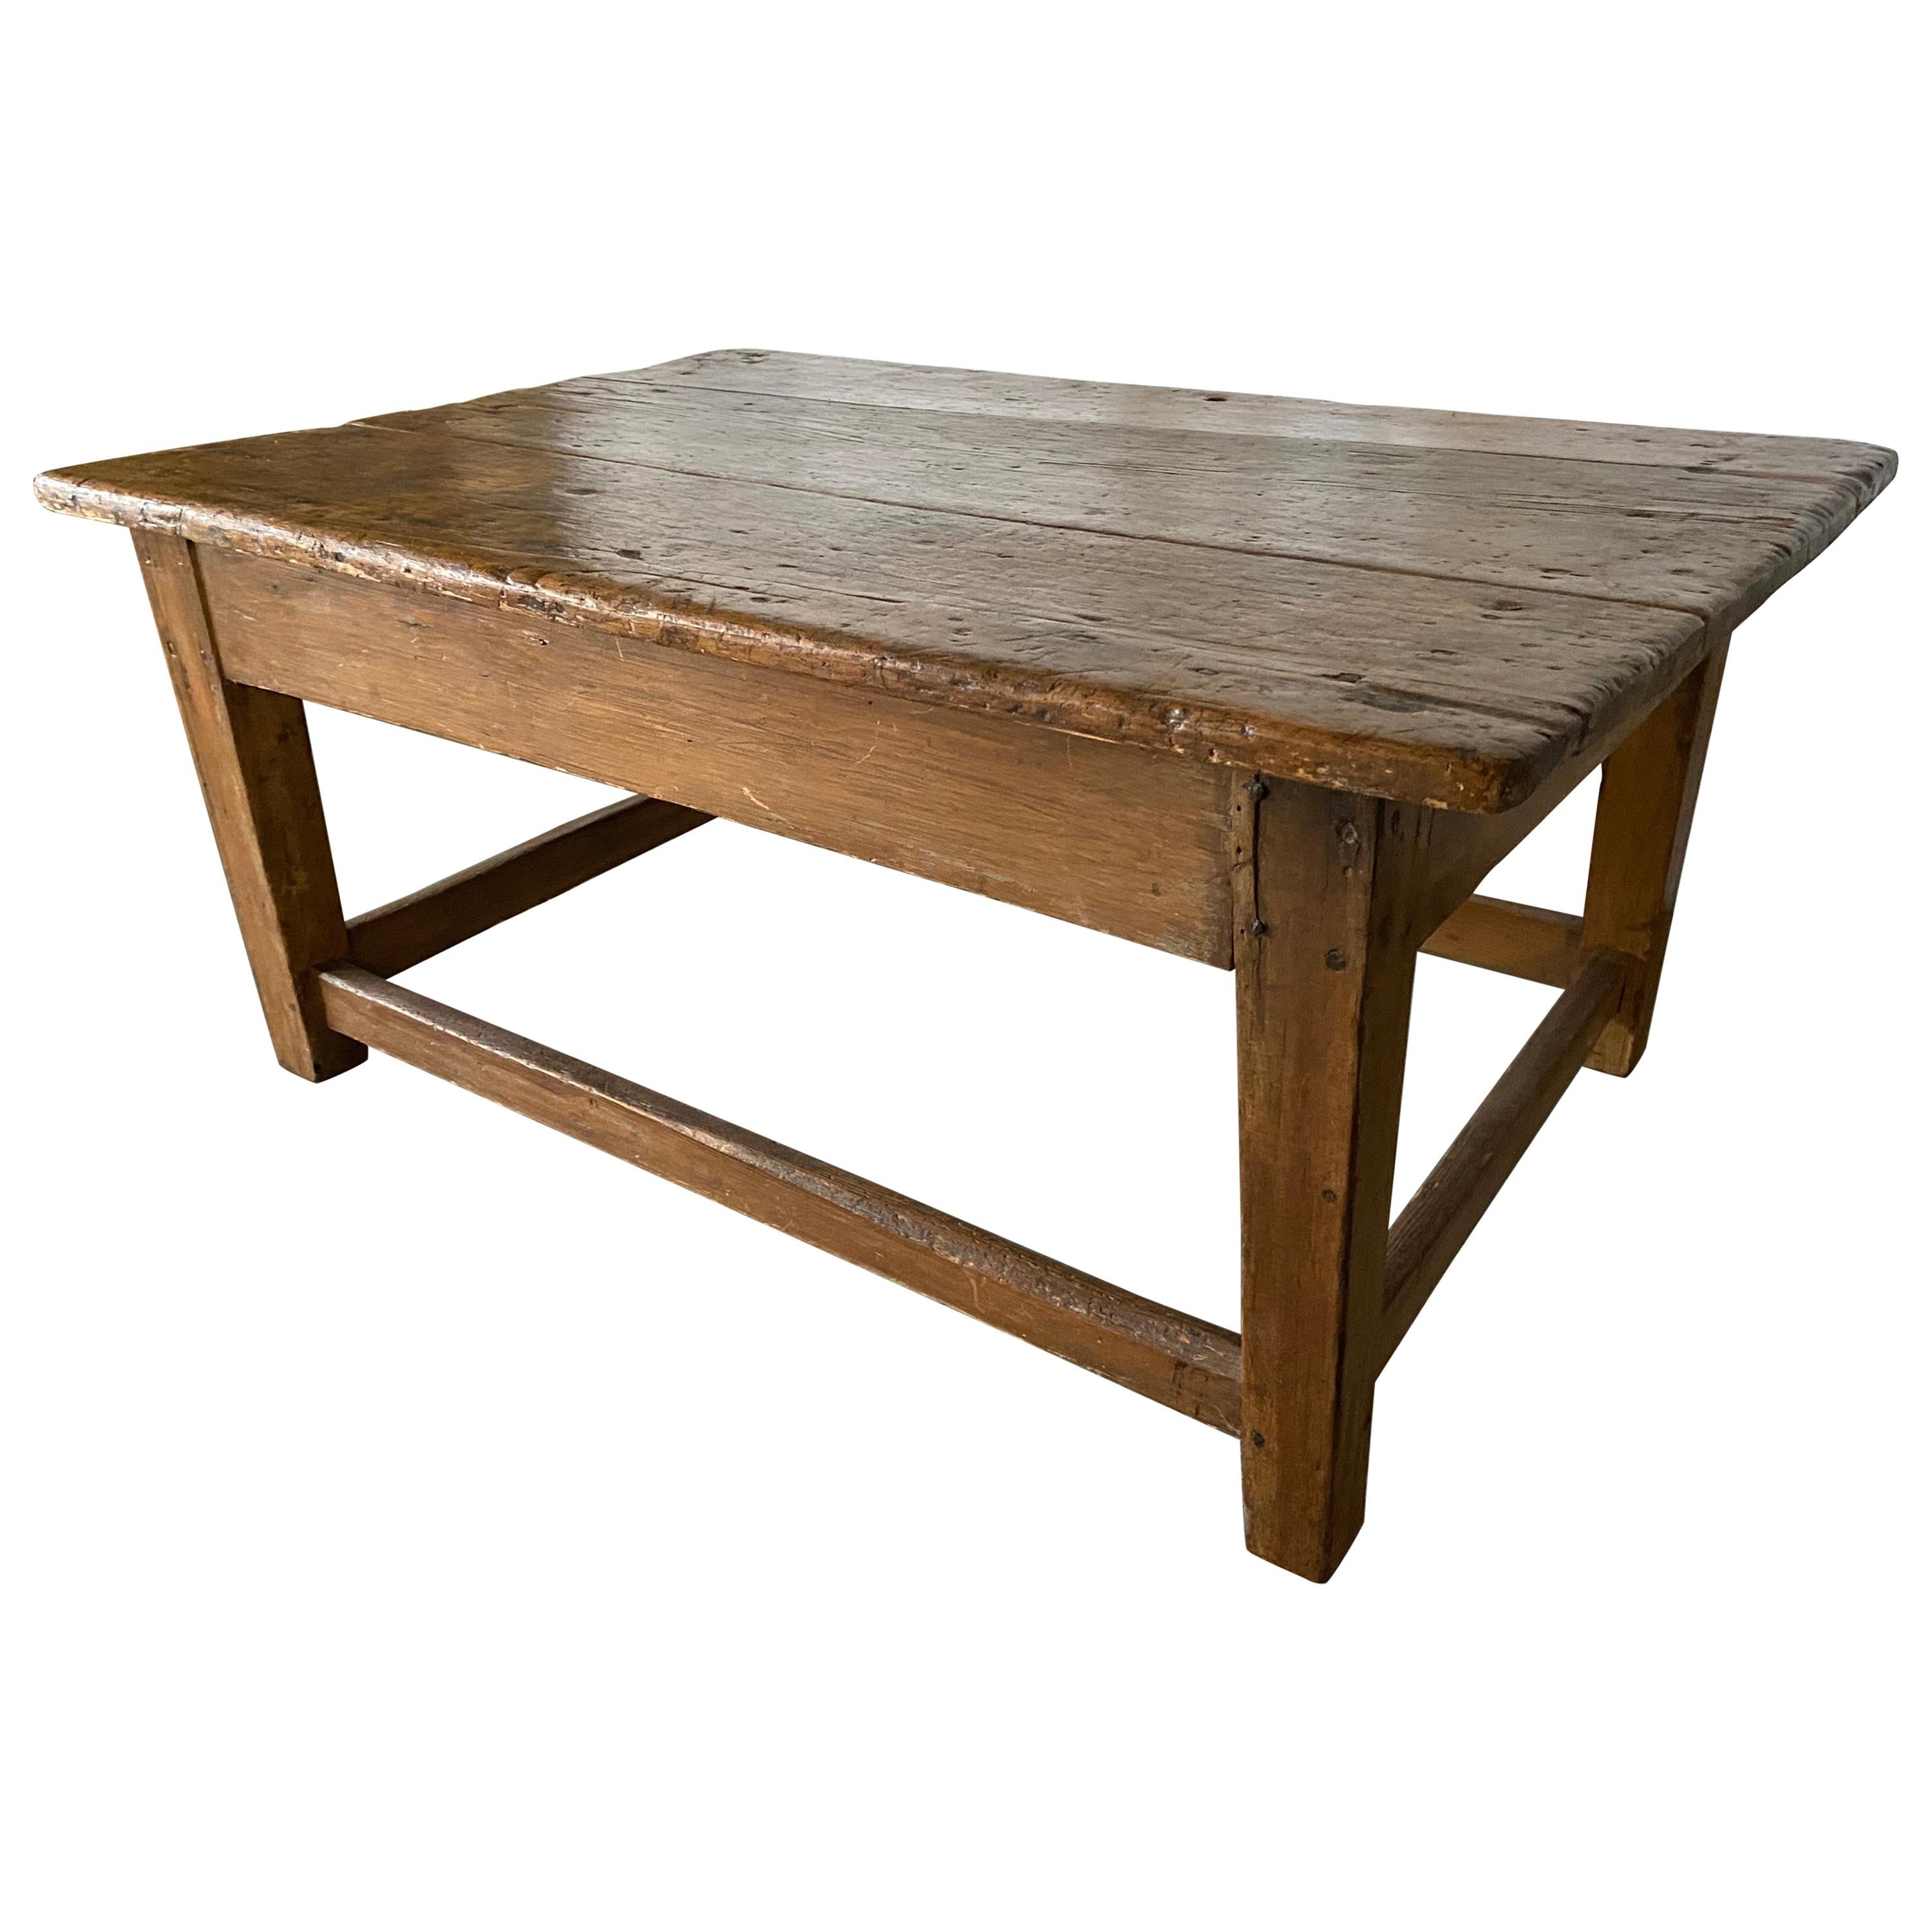 19th Century Rustic Antique Coffee Table